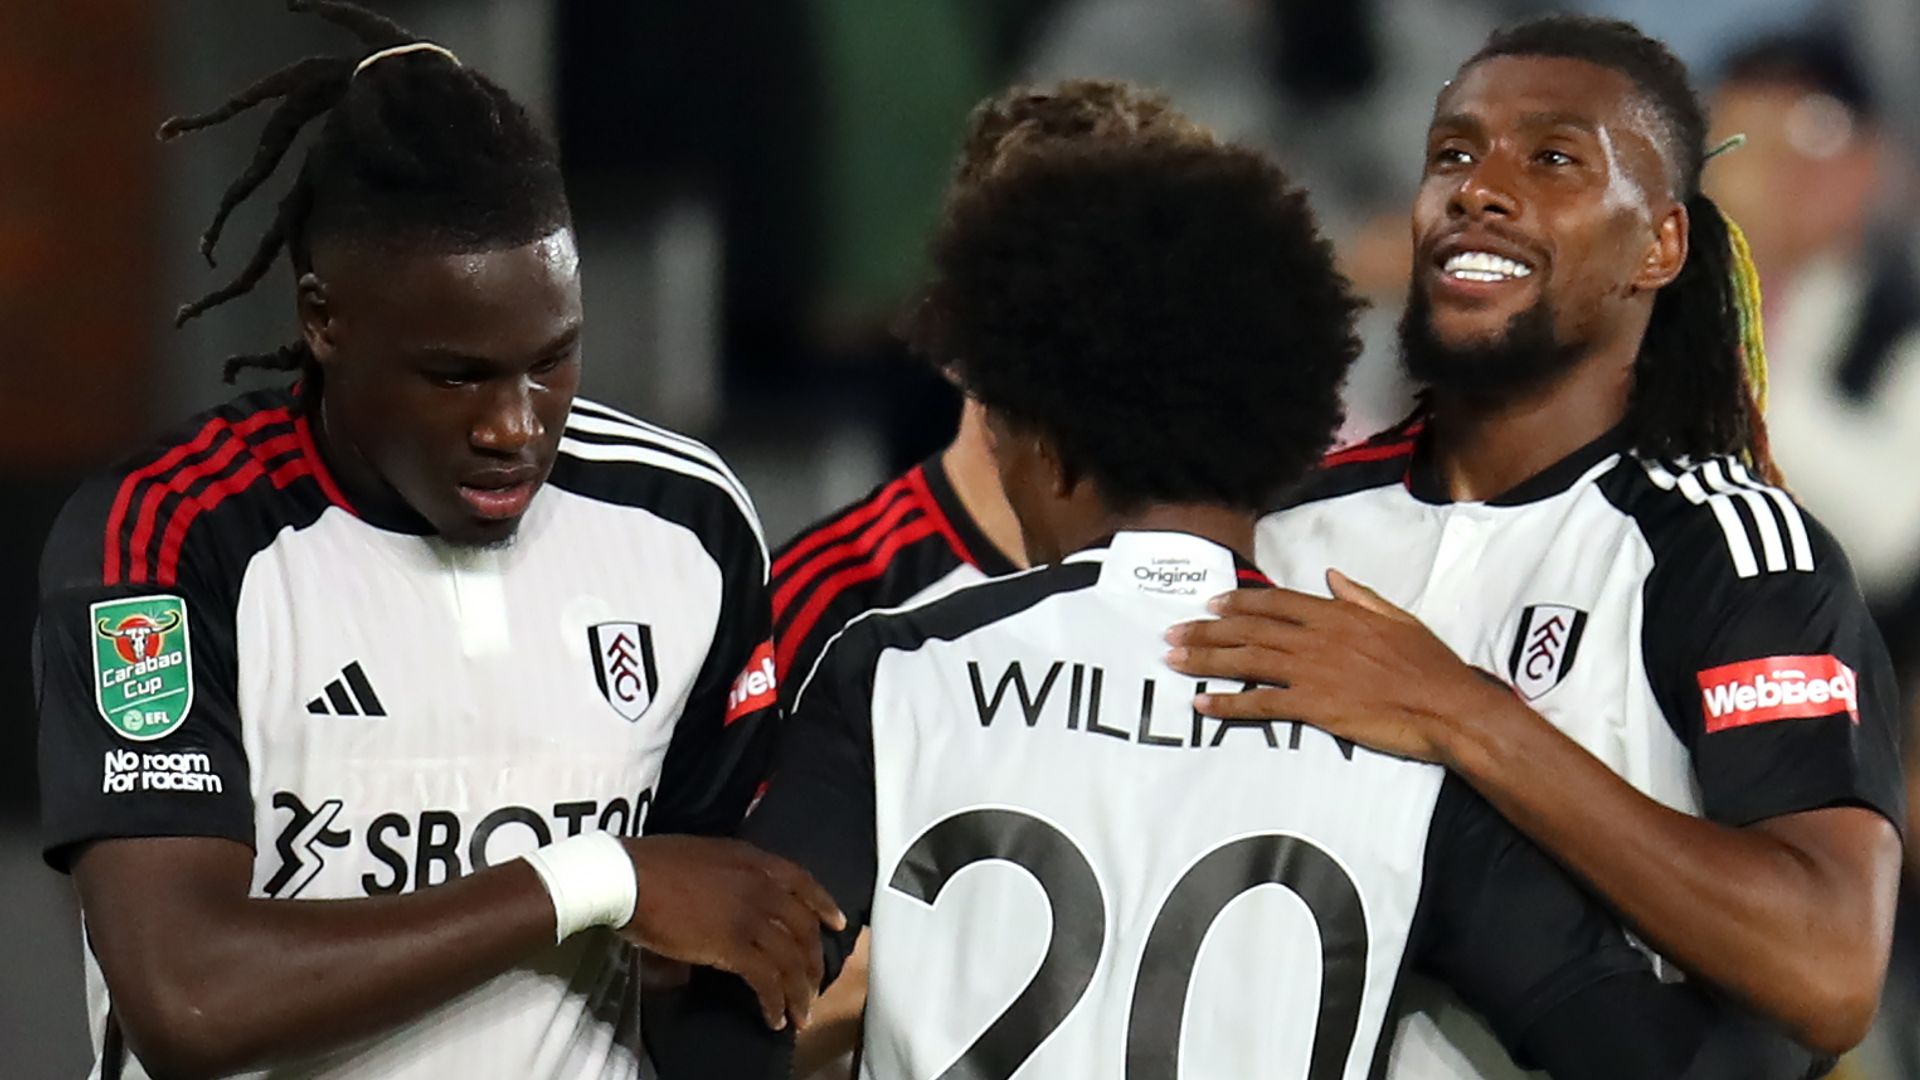 Fulham beat Norwich to reach Carabao Cup fourth round